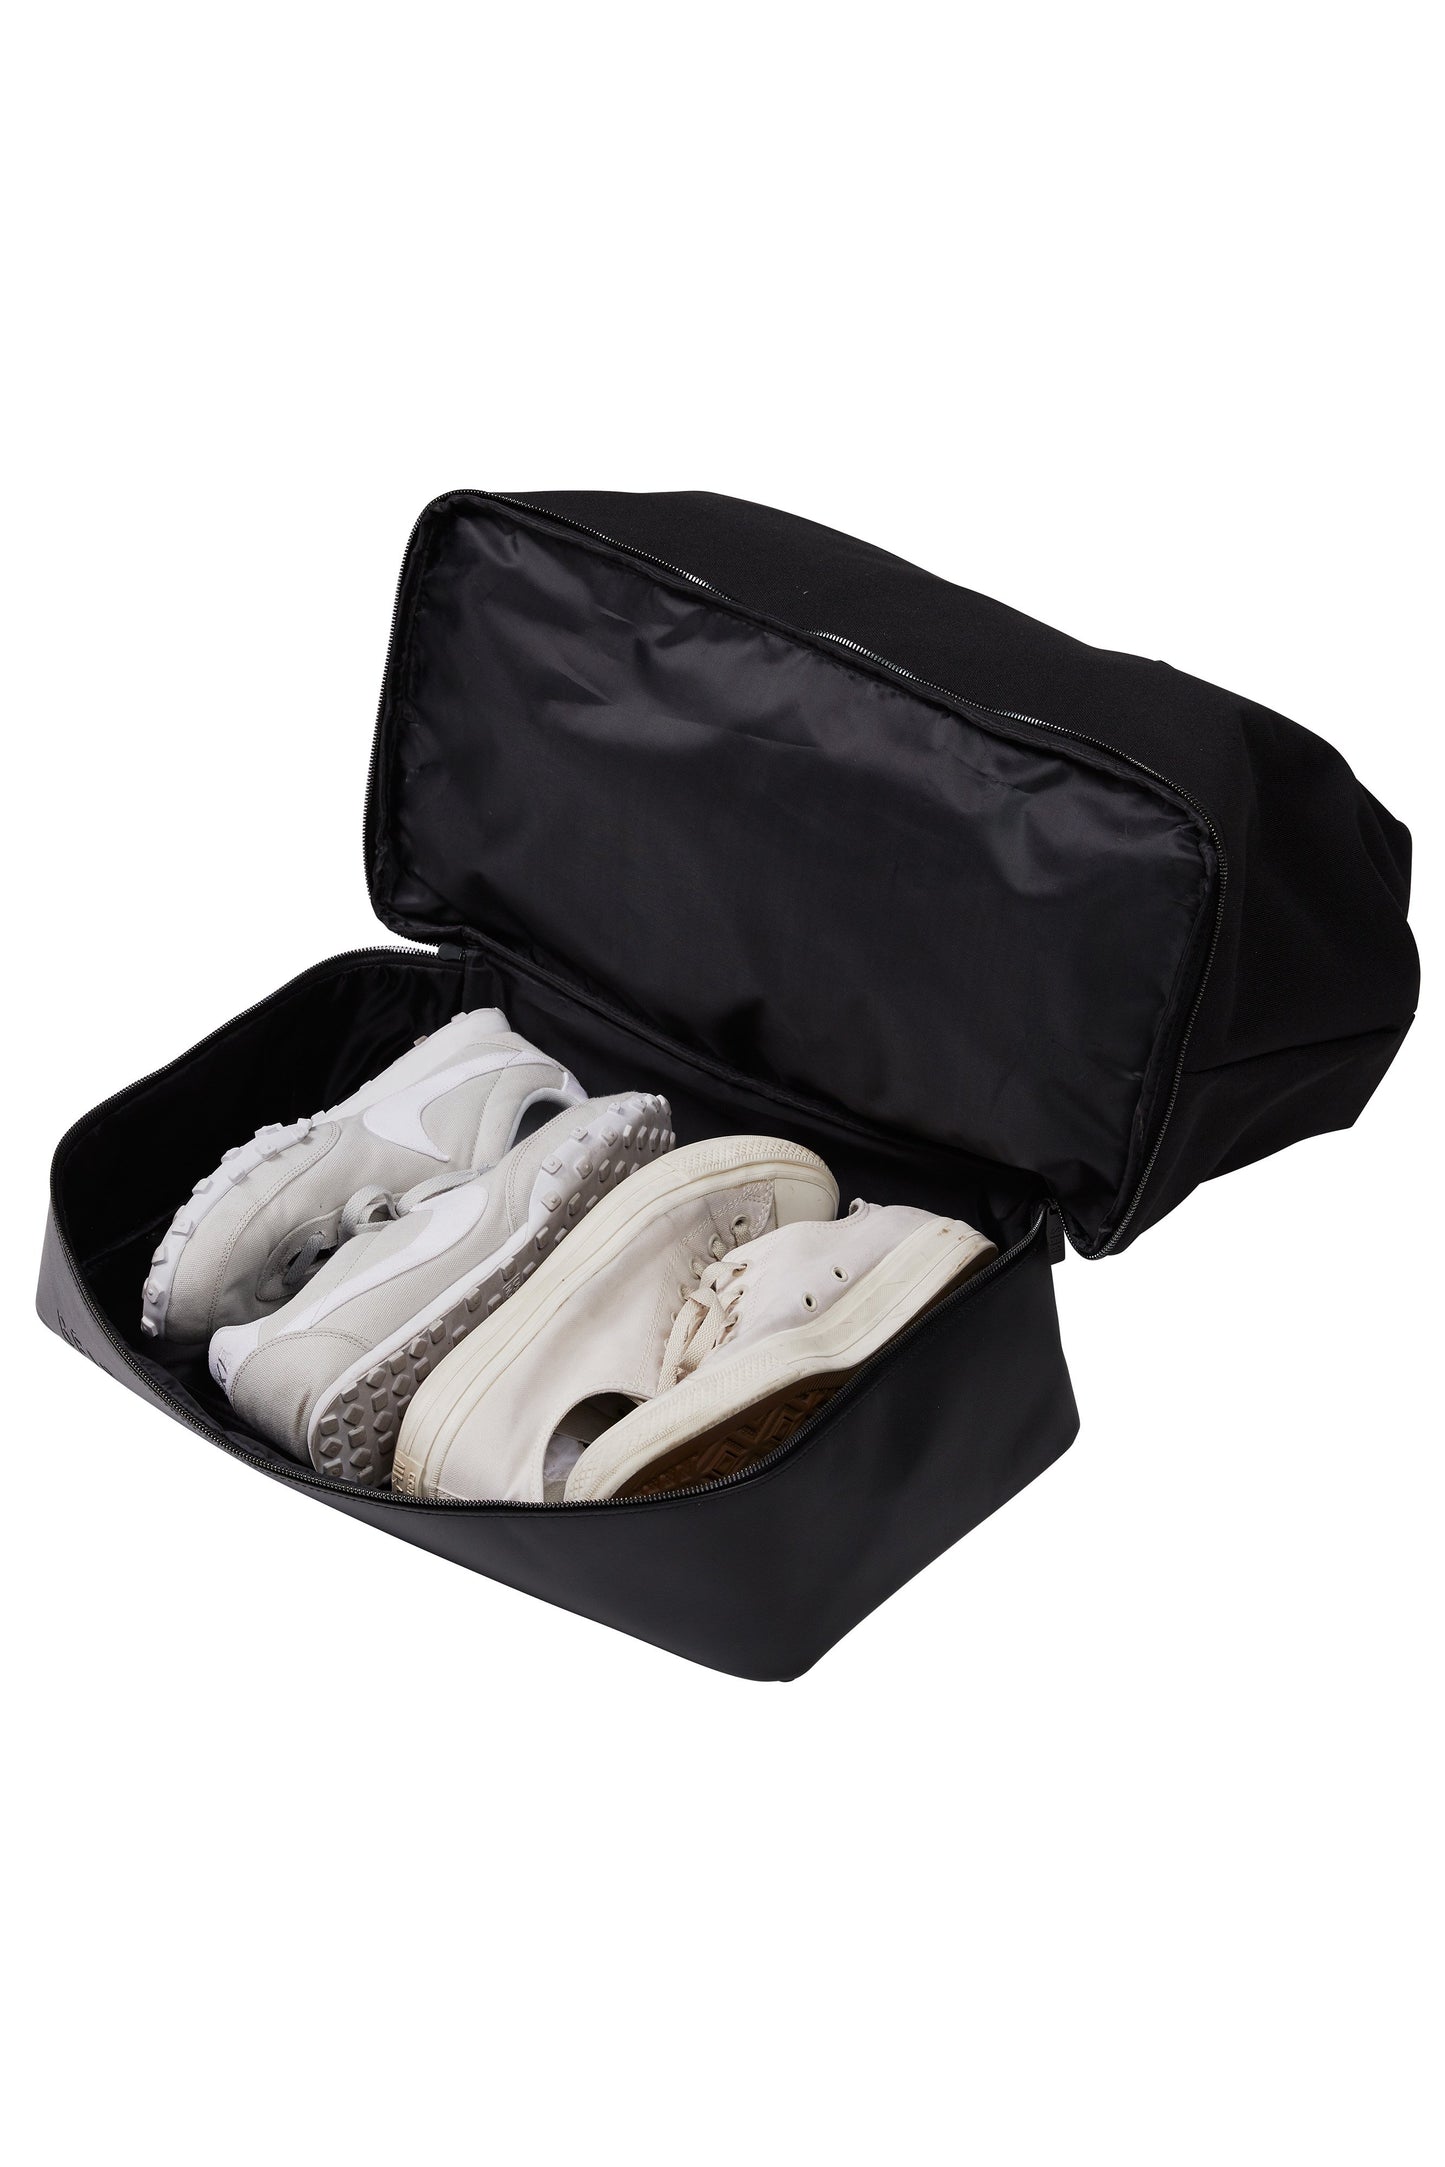 Weekender Black Open Bottom Compartment with Shoes